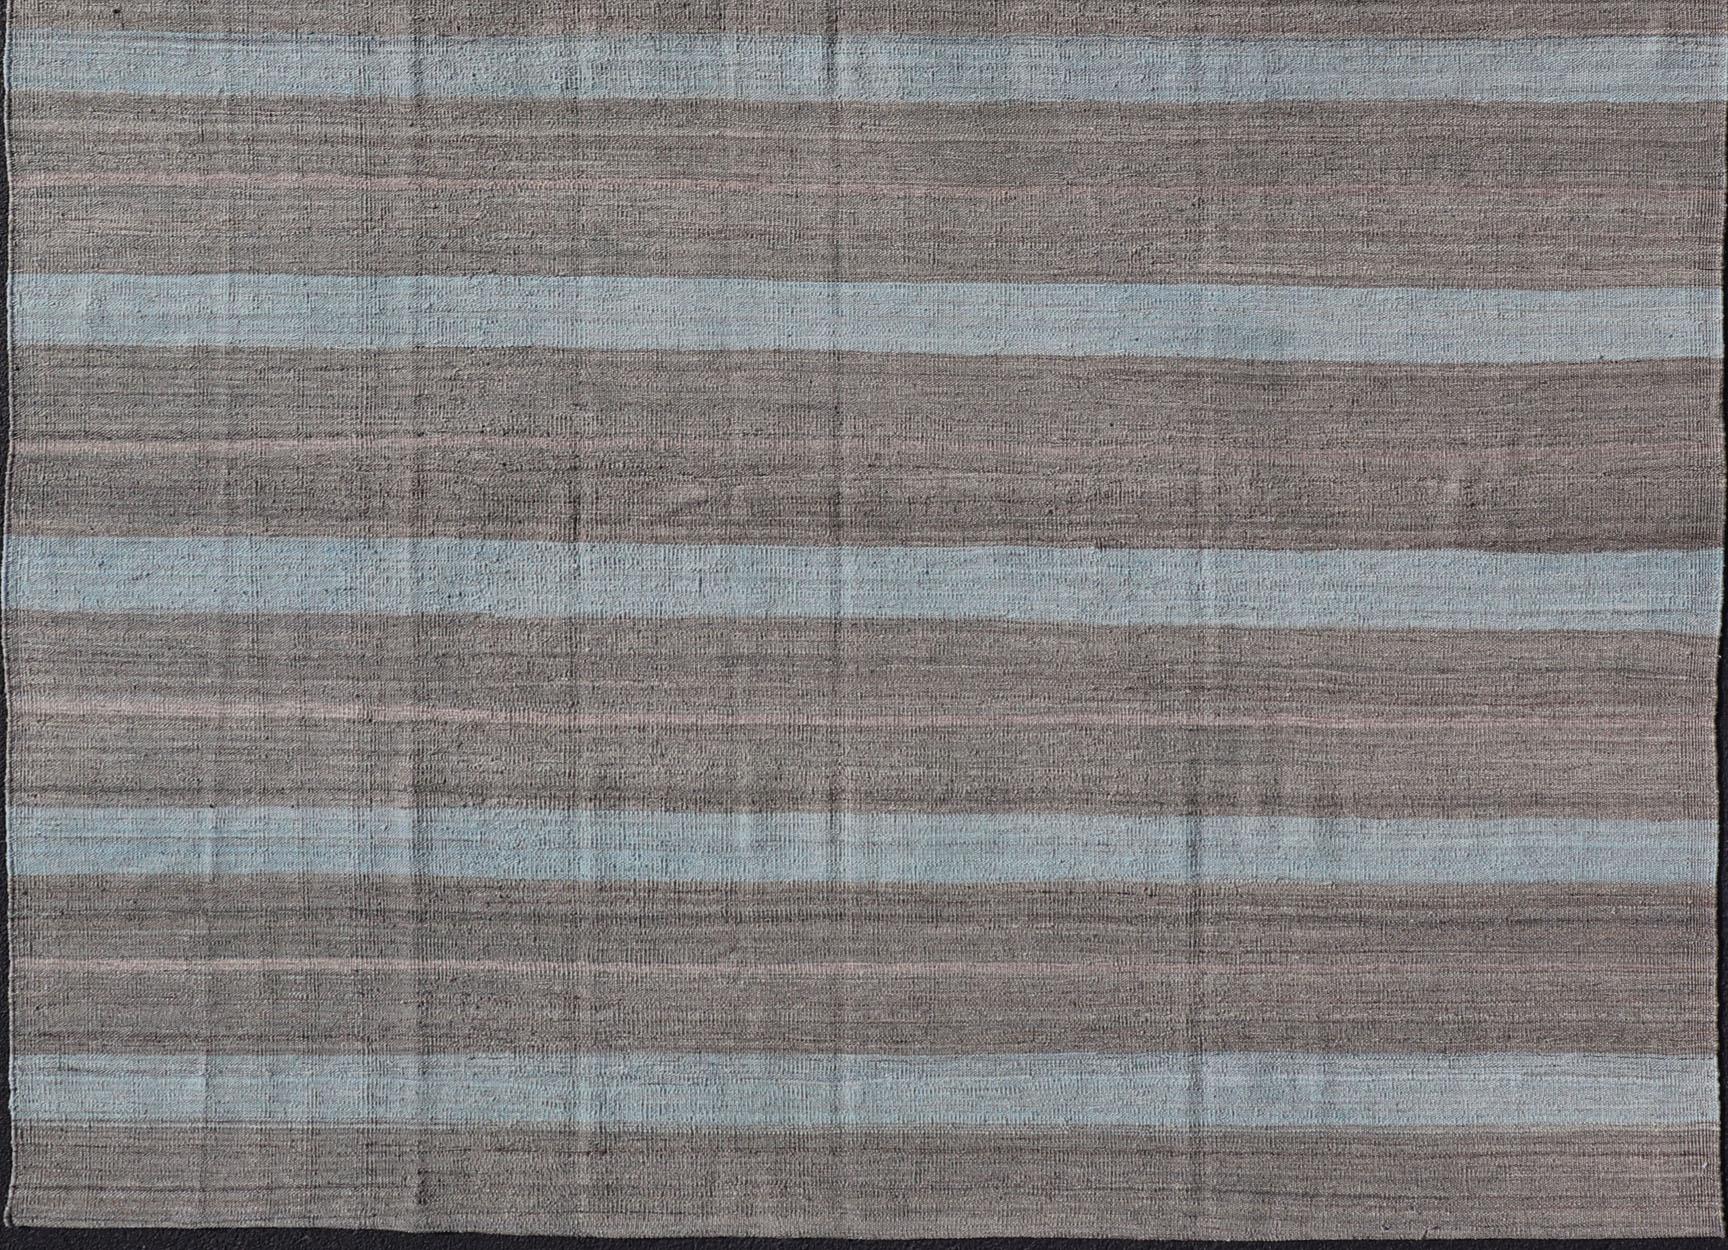 Flat-weave Kilim rug with stripes with modern design in shades of blue's, gray's, Keivan Woven Arts / rug AFG-25580, country of origin / type: Afghanistan / Kilim

This beautiful Kilim piece features a Classic stripe design that evokes casual and